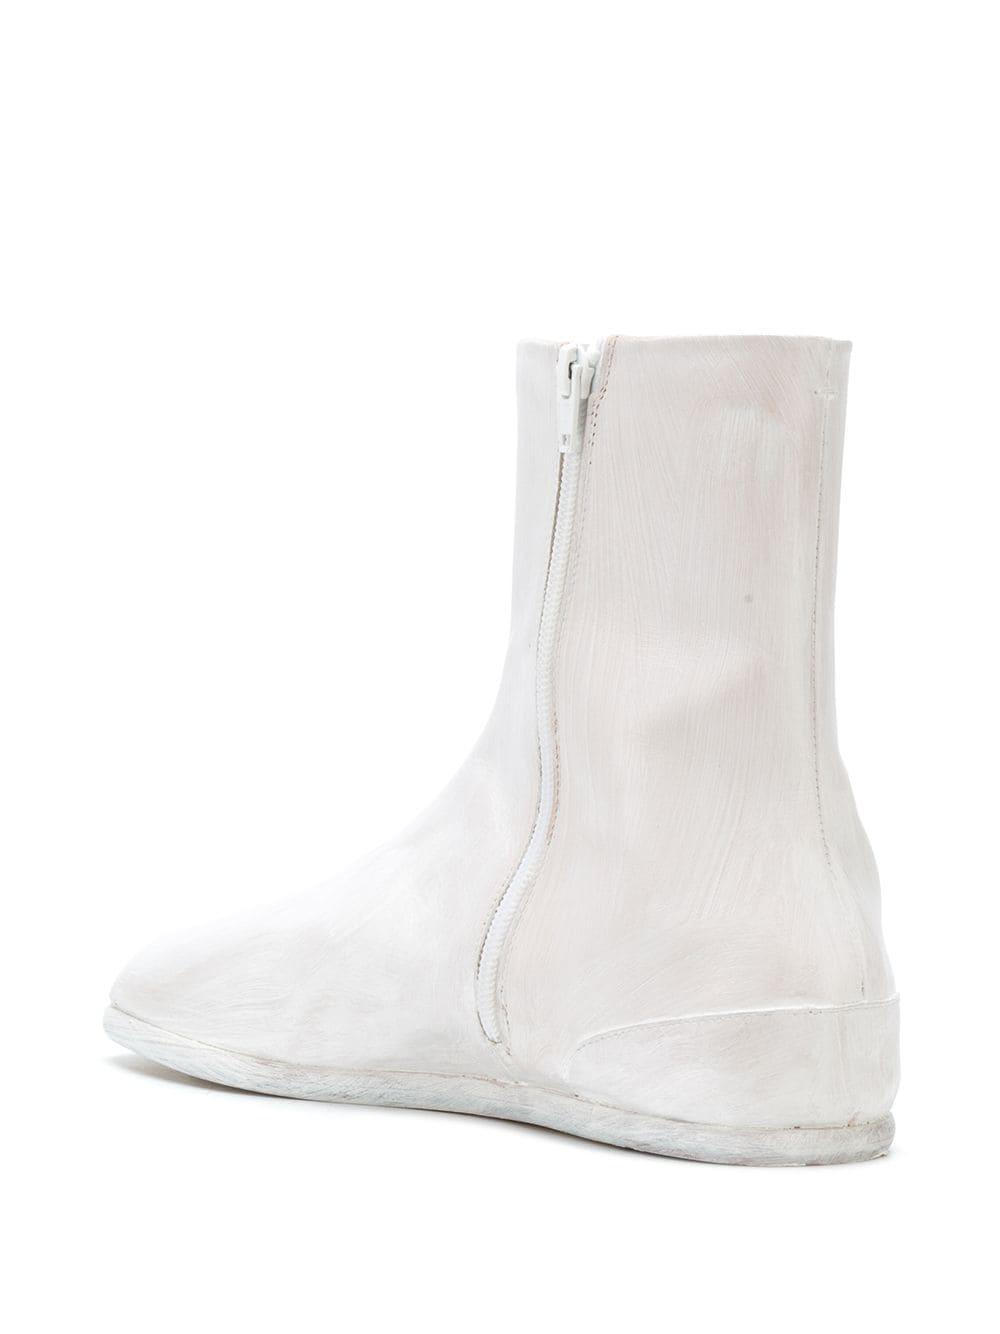 Maison Margiela Leather Tabi Flat Boots in White for Men - Lyst